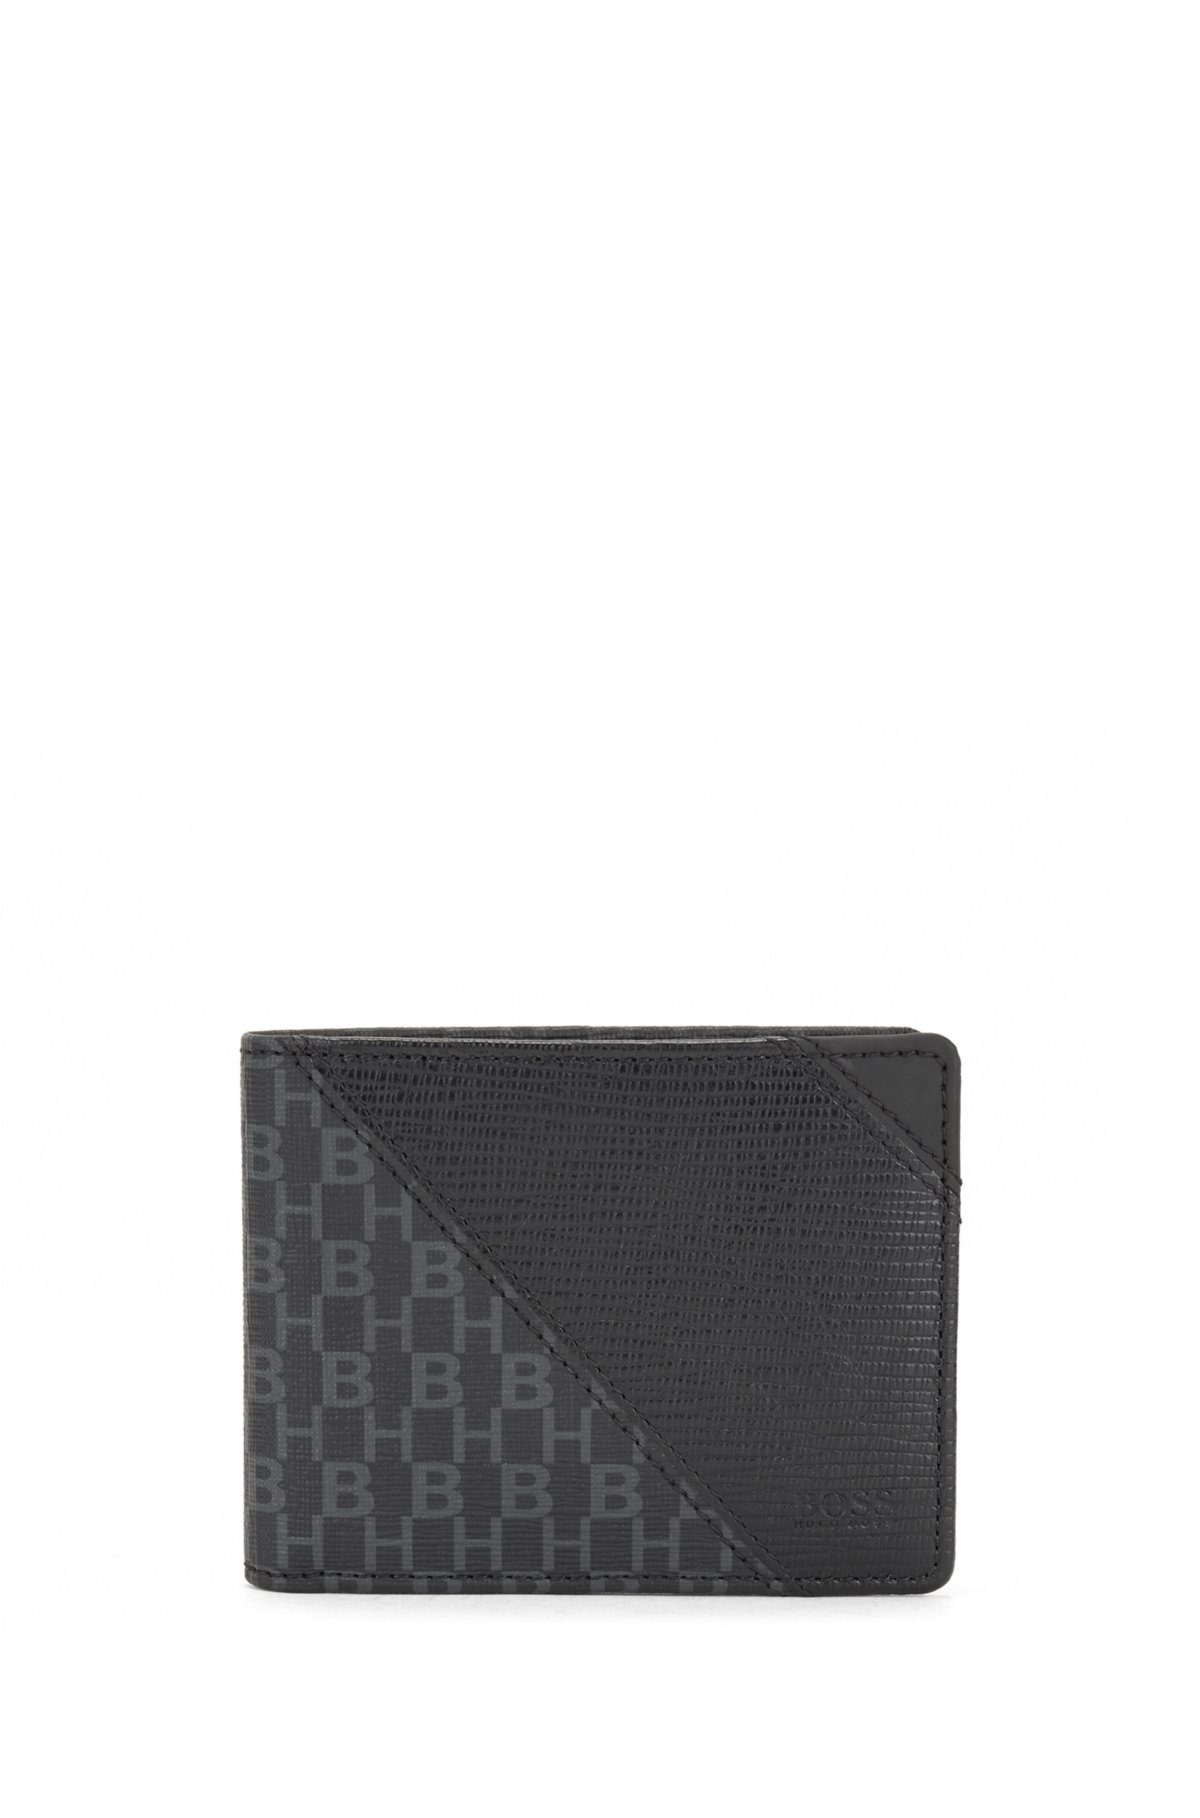 Leather coin-pocket wallet with all-over embossed eagle | EMPORIO ARMANI Man